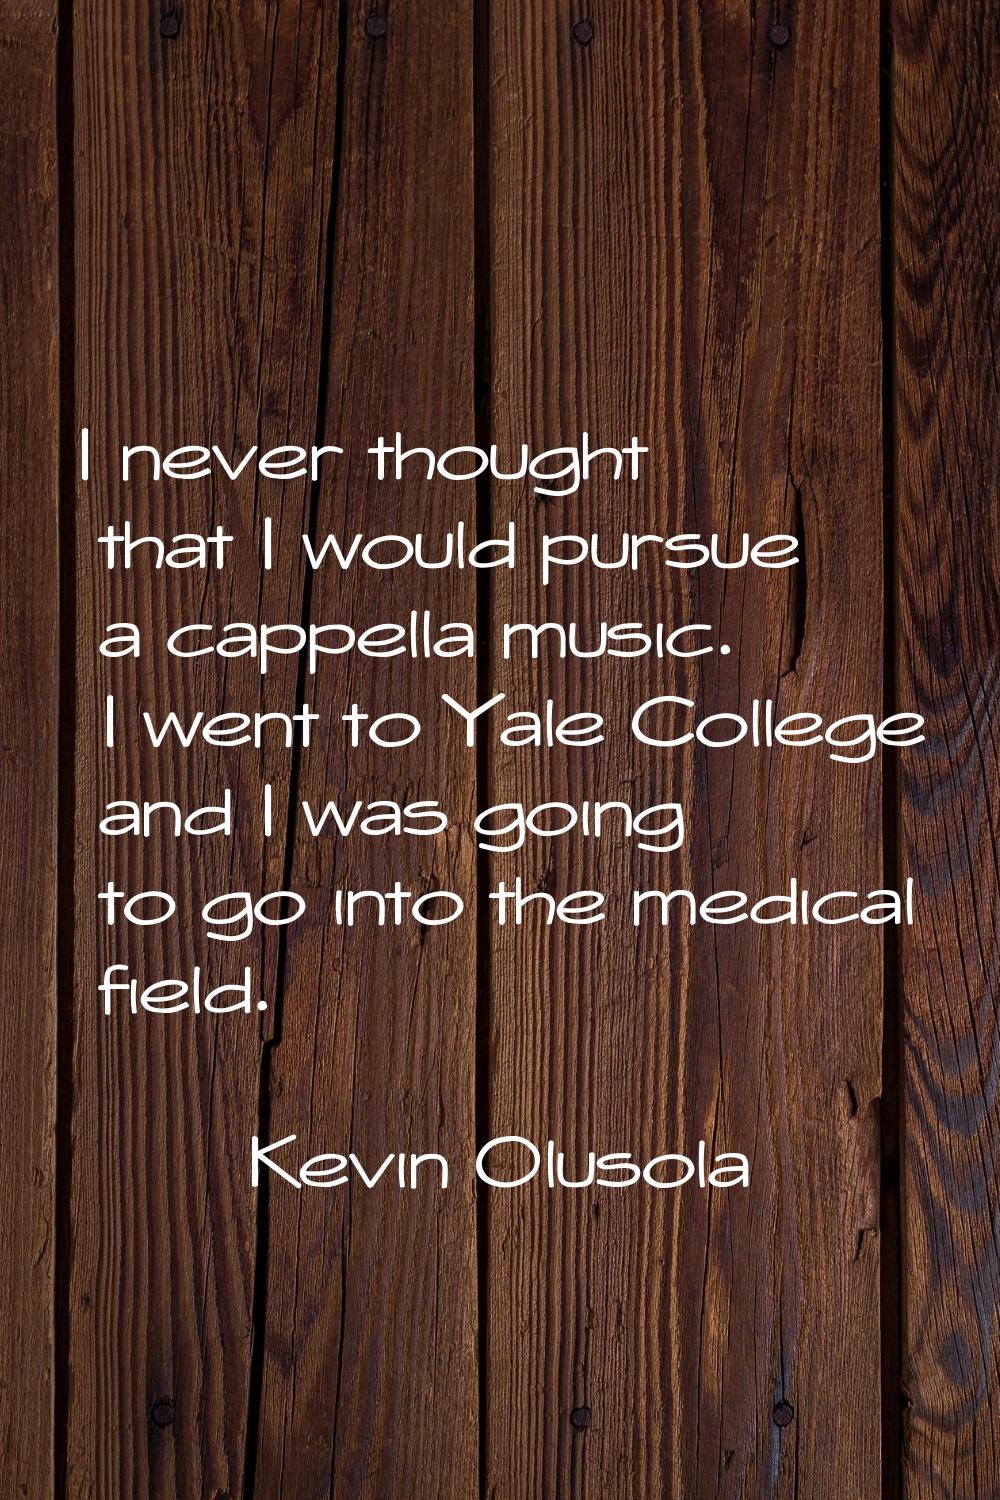 I never thought that I would pursue a cappella music. I went to Yale College and I was going to go 